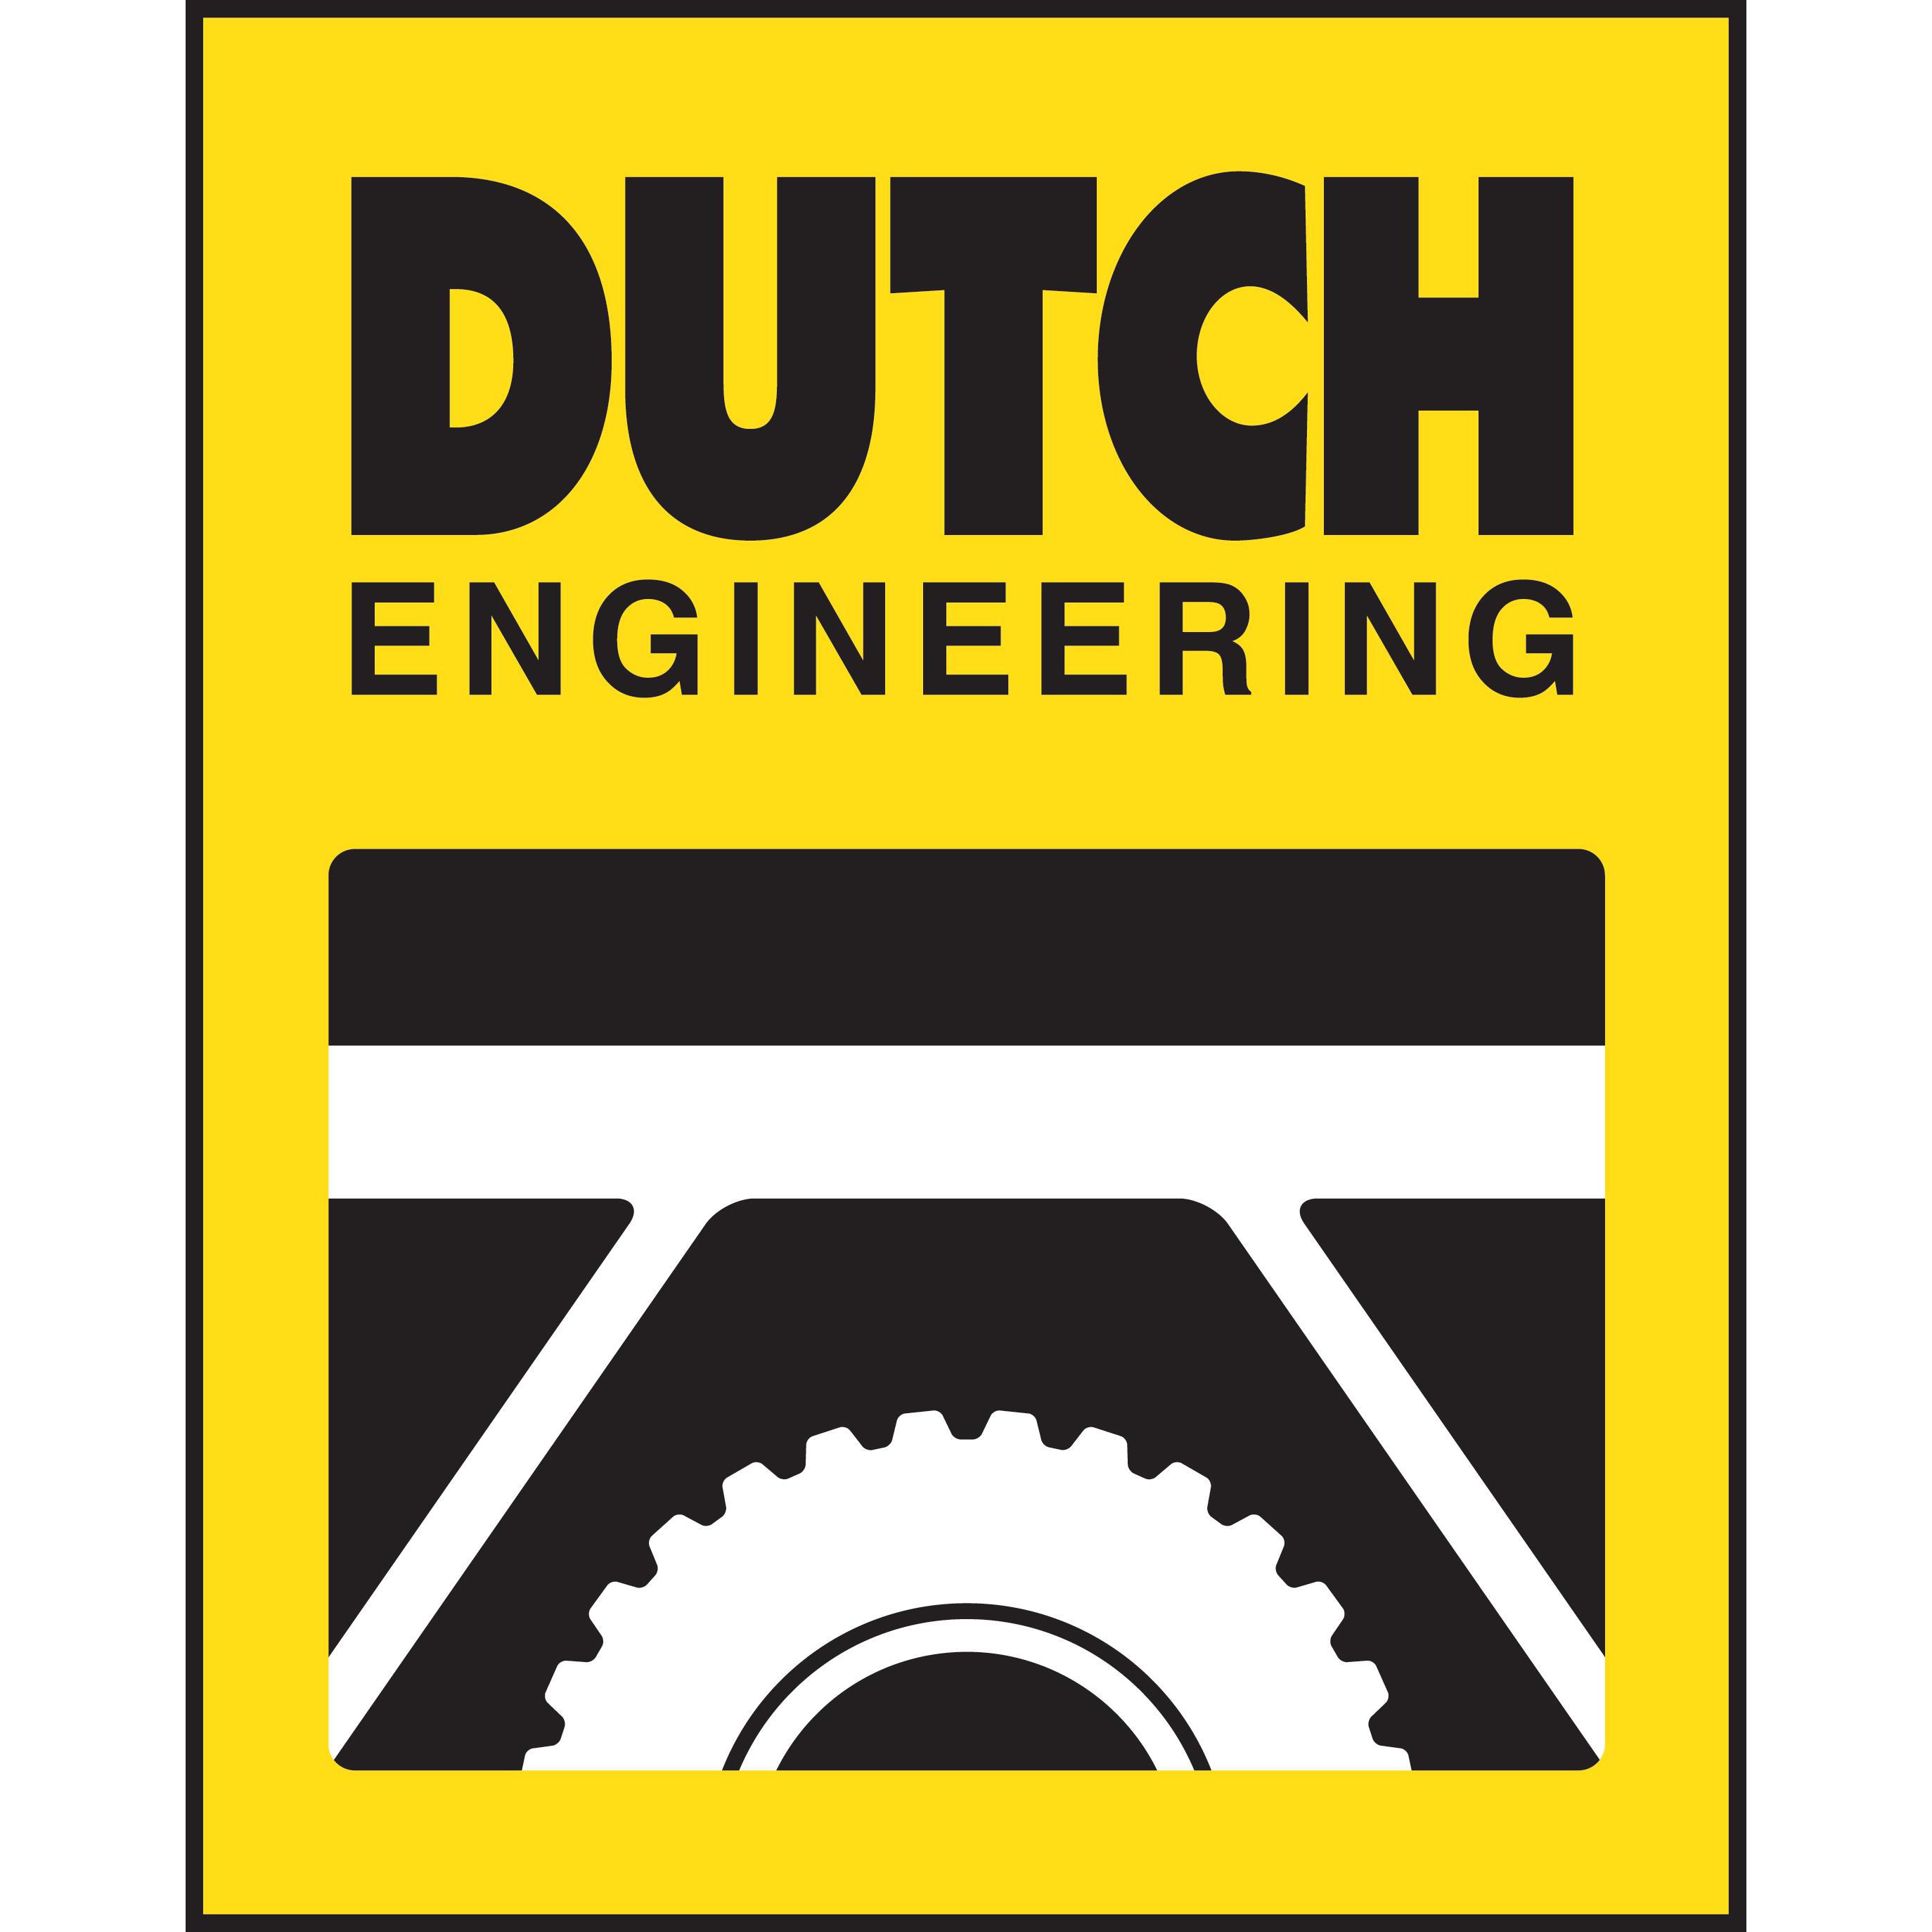 Dutch Engineering - Maryville, NSW 2293 - (02) 4969 2288 | ShowMeLocal.com